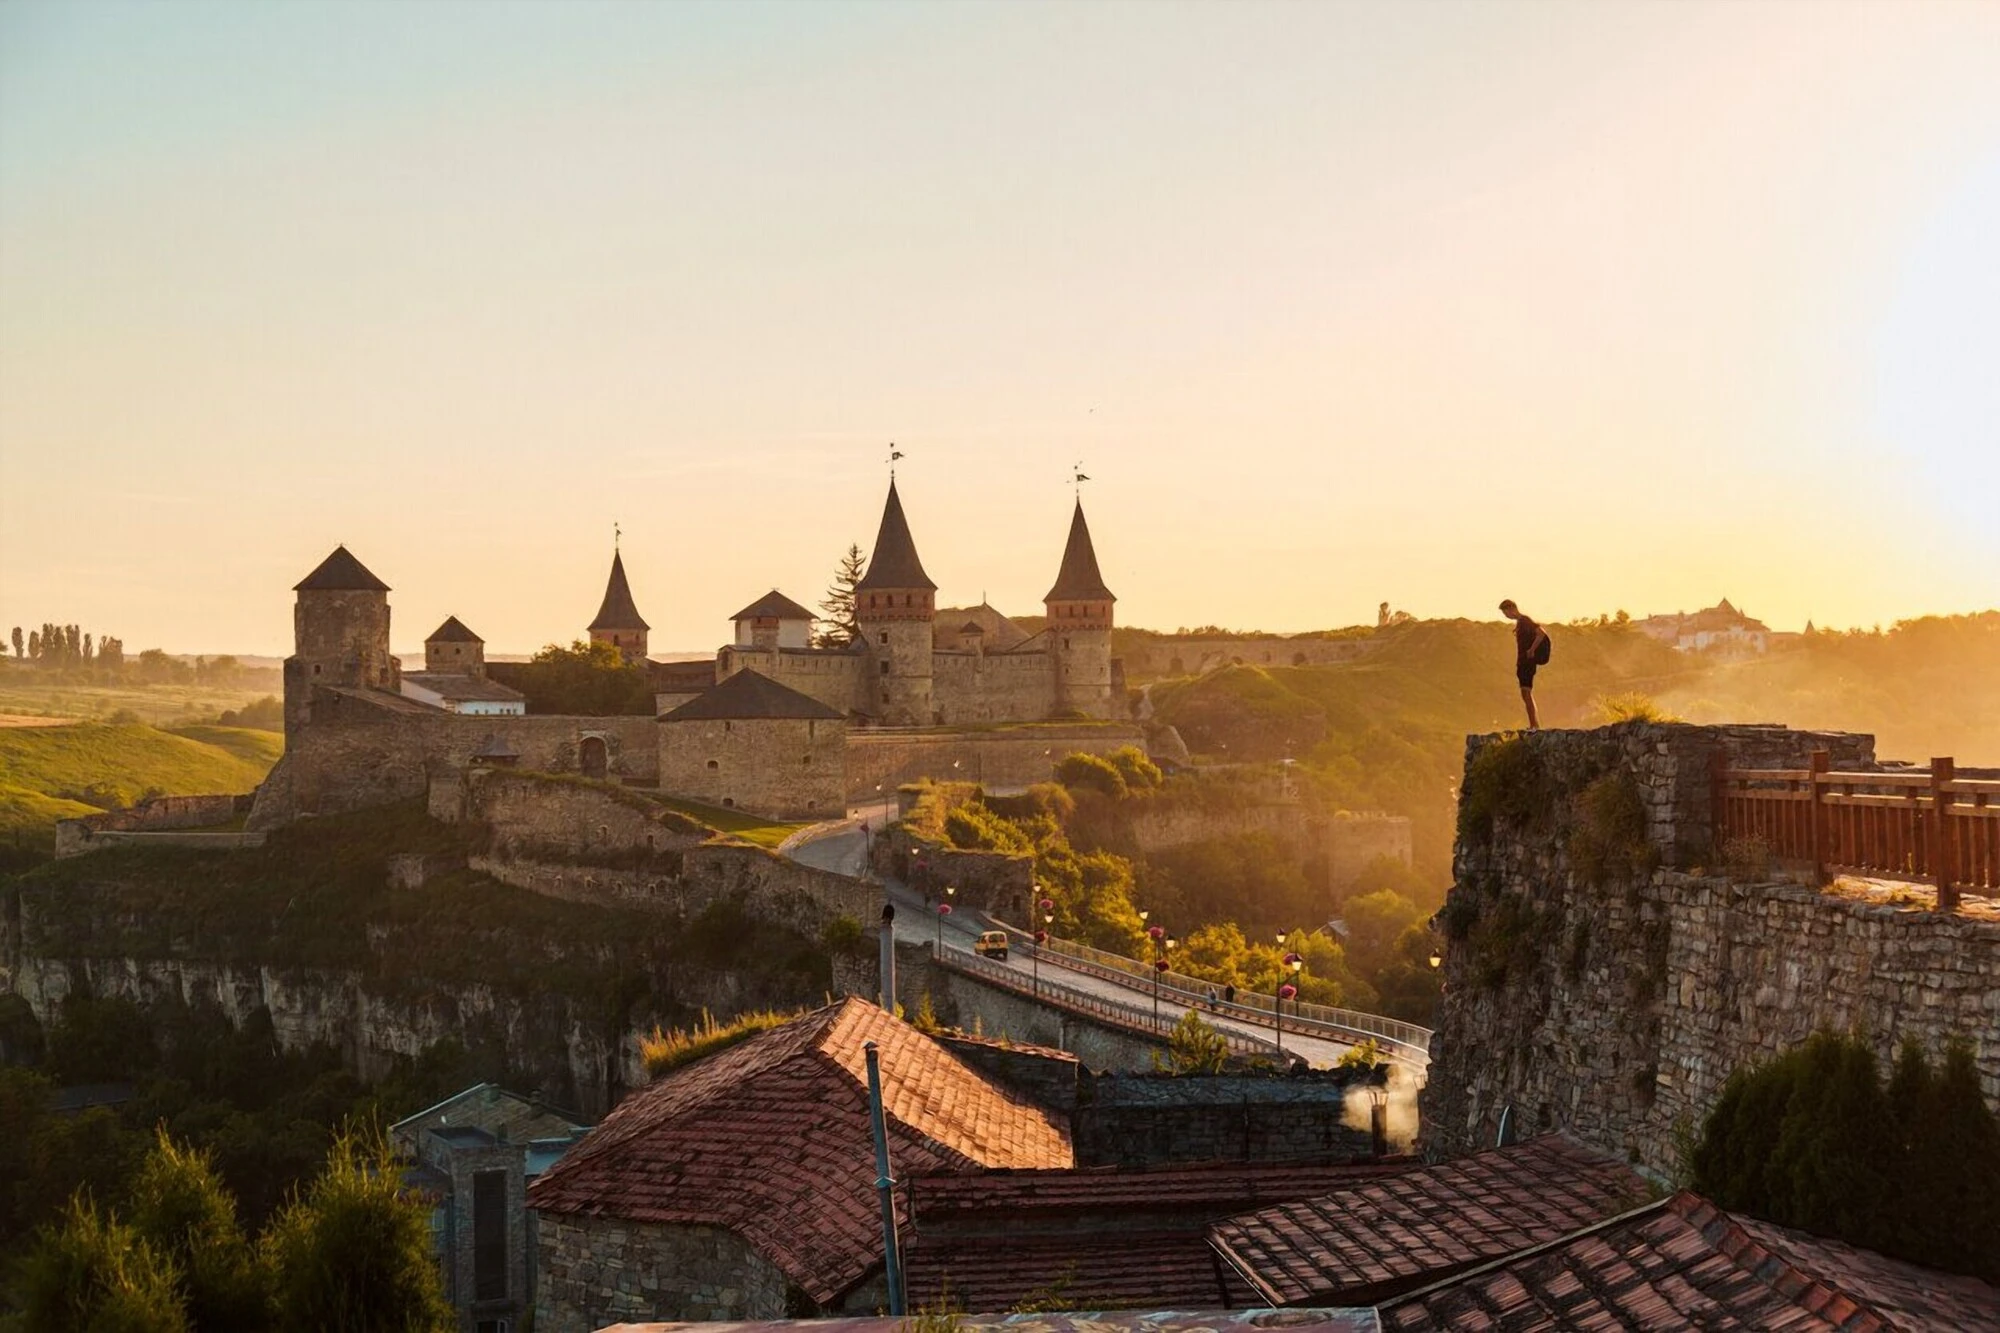 8 Great Things to Do in Kamianets Podilskyi, Ukraine - A Complete Guide to Backpacking Kamianets Podilskyi